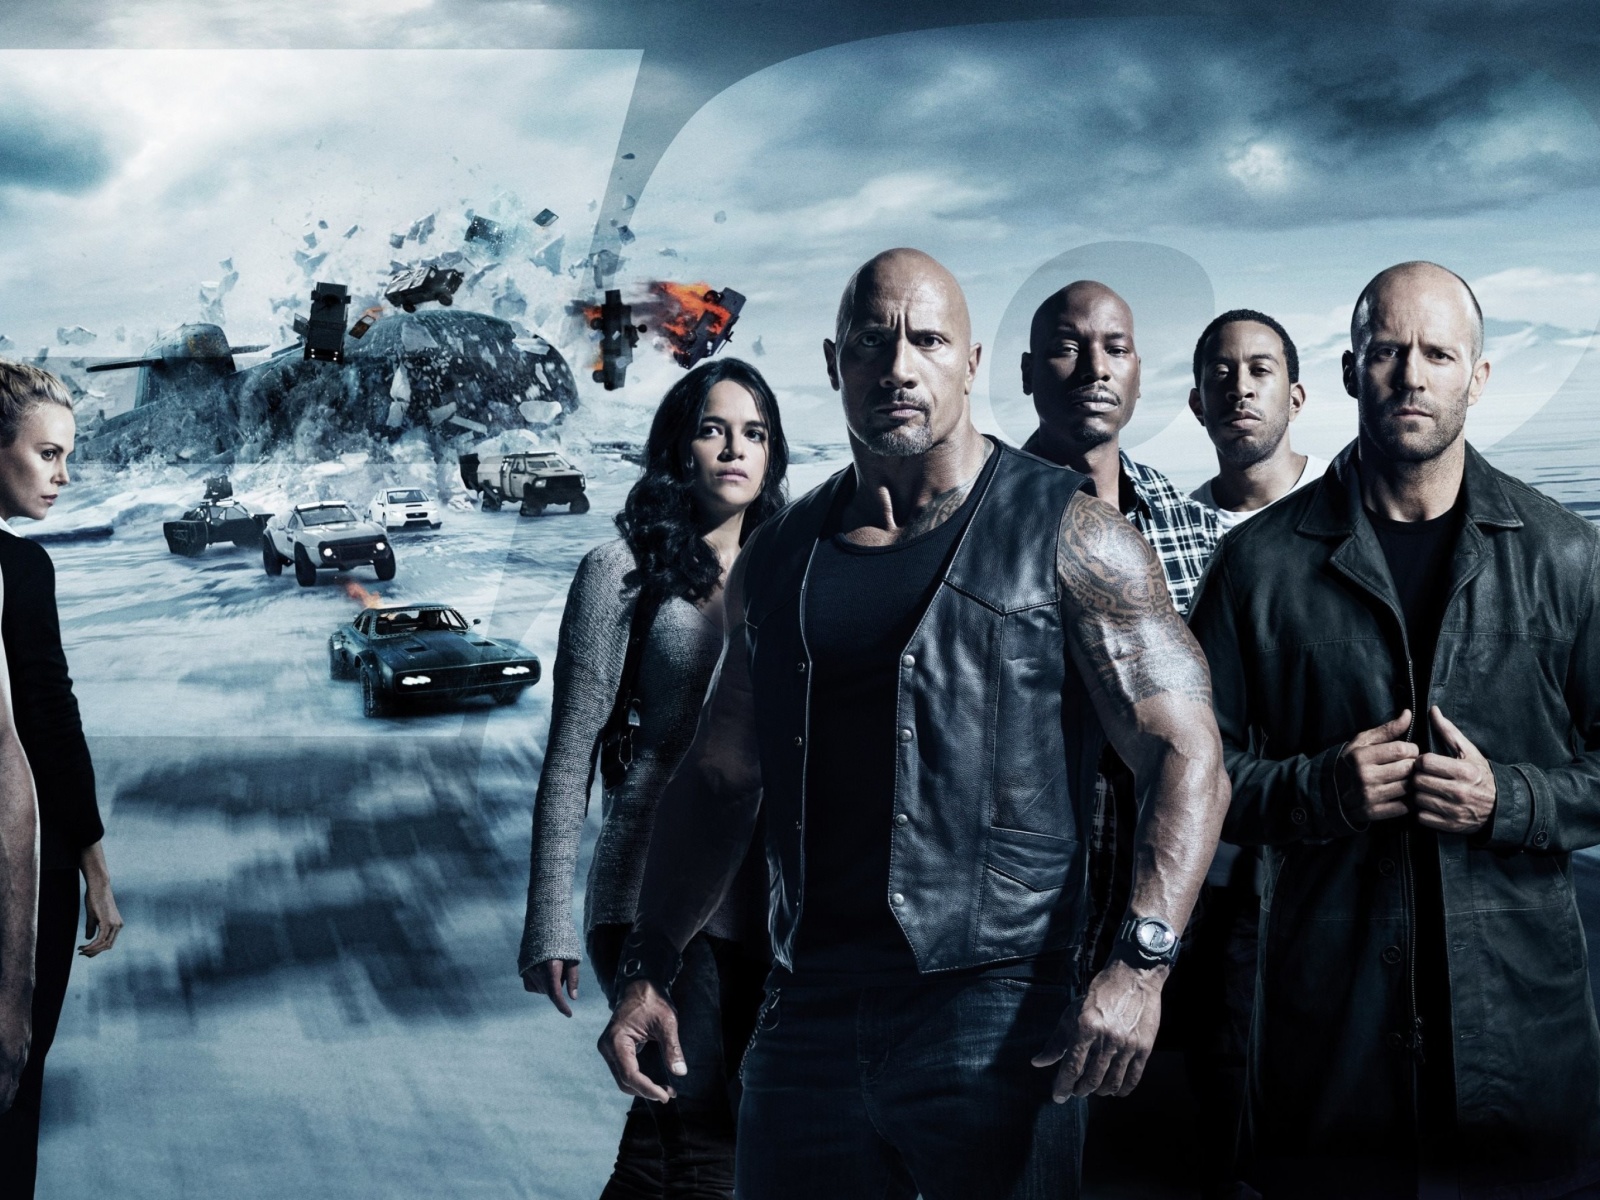 The Fate of the Furious with Vin Diesel, Dwayne Johnson, Charlize Theron wallpaper 1600x1200